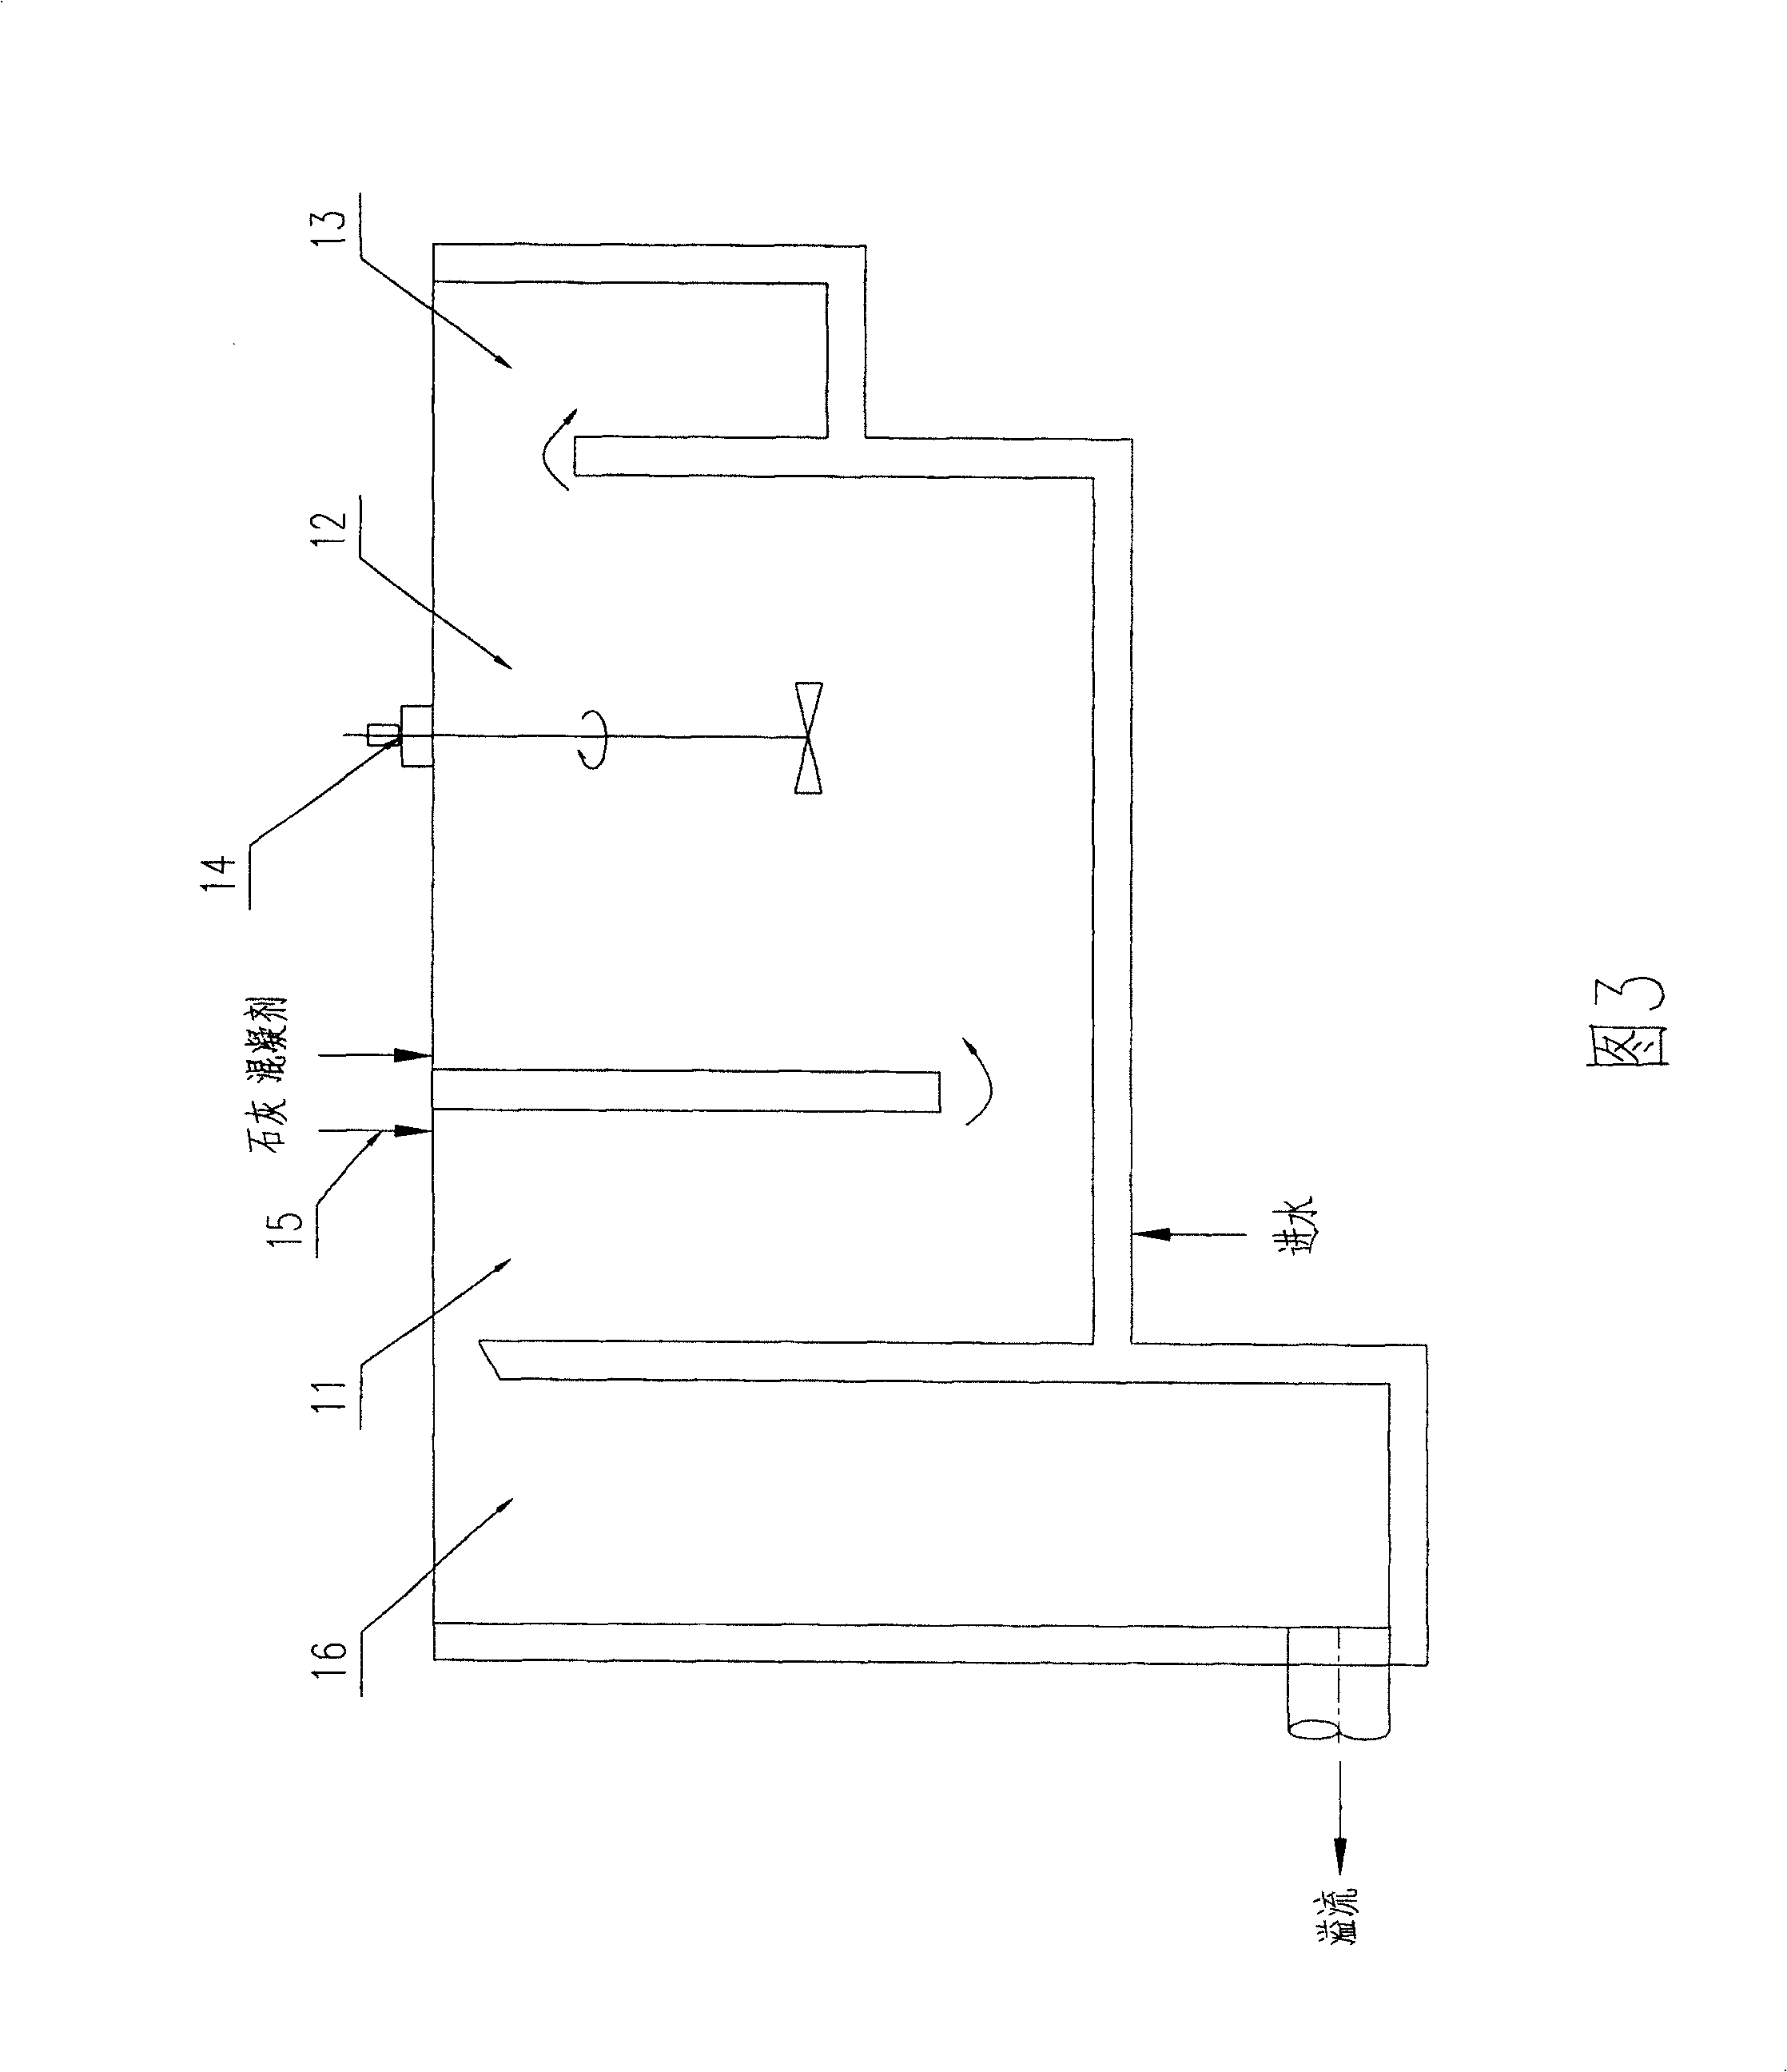 Method and equipment for purifying recirculated cooling water or town B-grade sewage